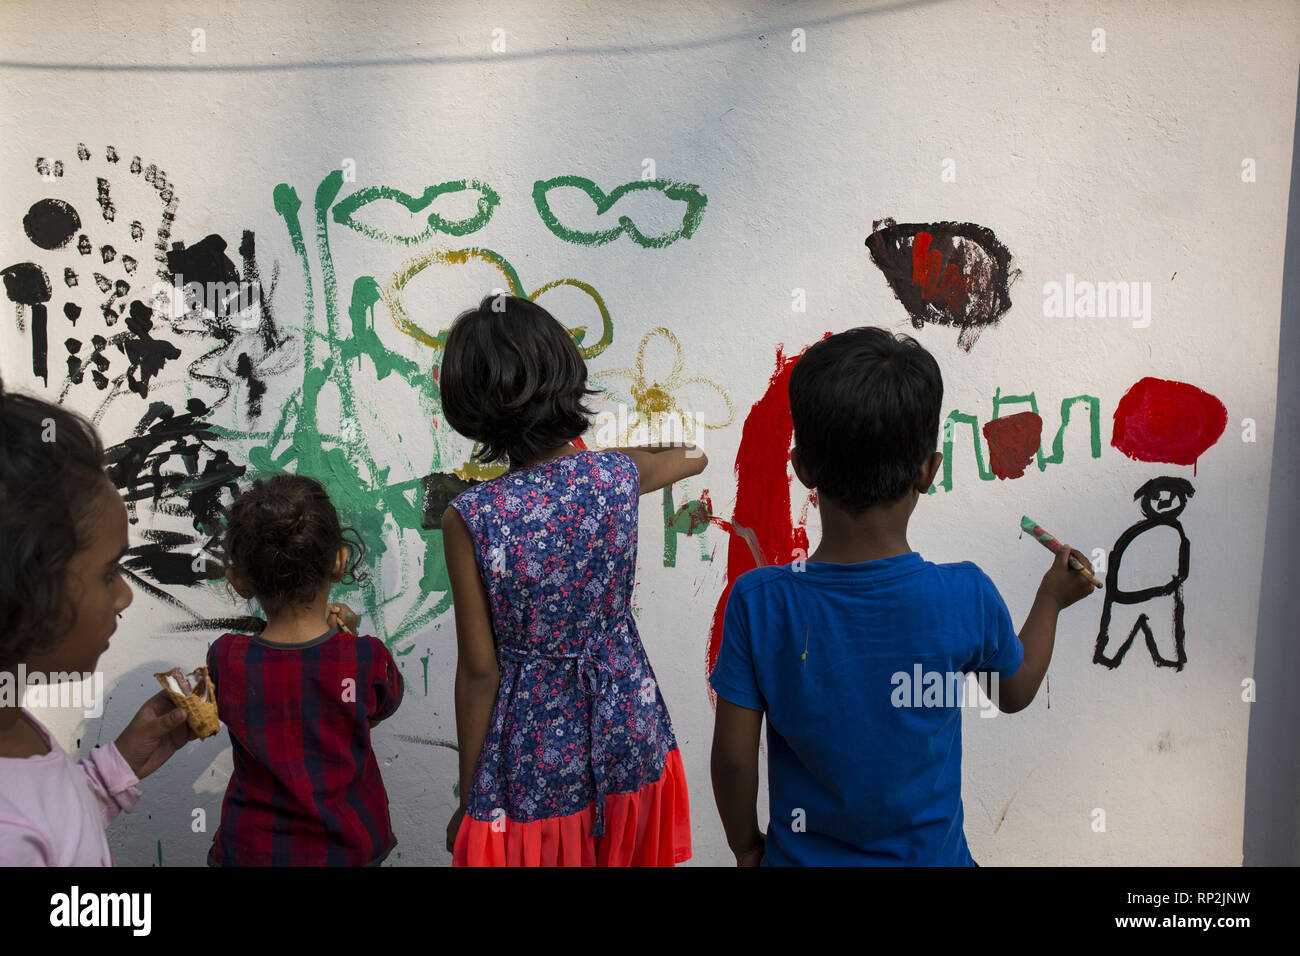 February 20, 2019 - DHAKA, BANGLADESH - FEBRUARY 20 : Children paints on the wall as part of the decoration for the International Mother Language Day celebration in front of the language matyrs monument  in Dhaka, Bangladesh on February 20, 2019...The nation will pay tribute to the Bangla language movement martyrs who sacrificed their life for their mother tongue in 1952, while the United Nations Educational Scientific and Cultural Organization (UNESCO) declared 21 February as the International Mother Language Day. (Credit Image: © Zakir Hossain Chowdhury/ZUMA Wire) Stock Photo